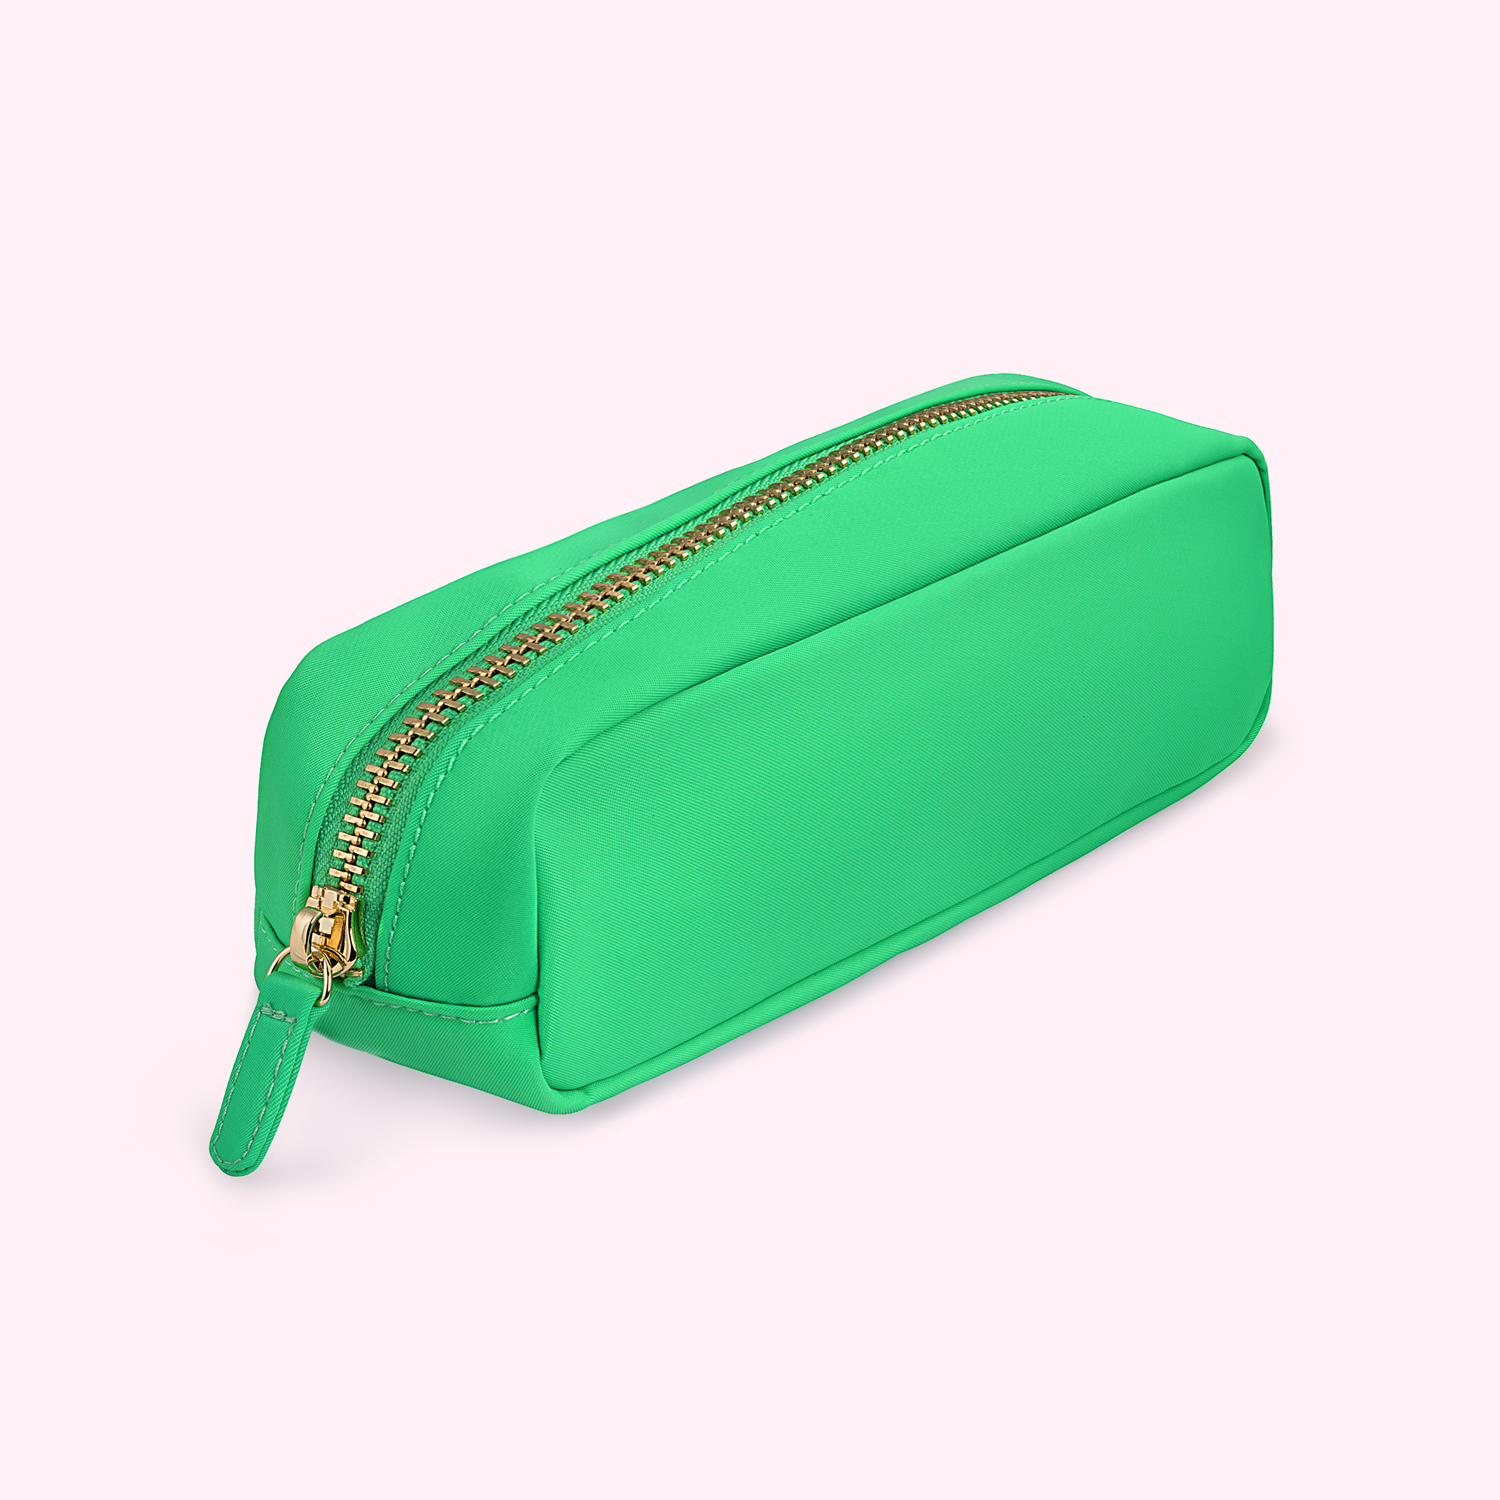 Big Lots Neon Green Pencil Pouch